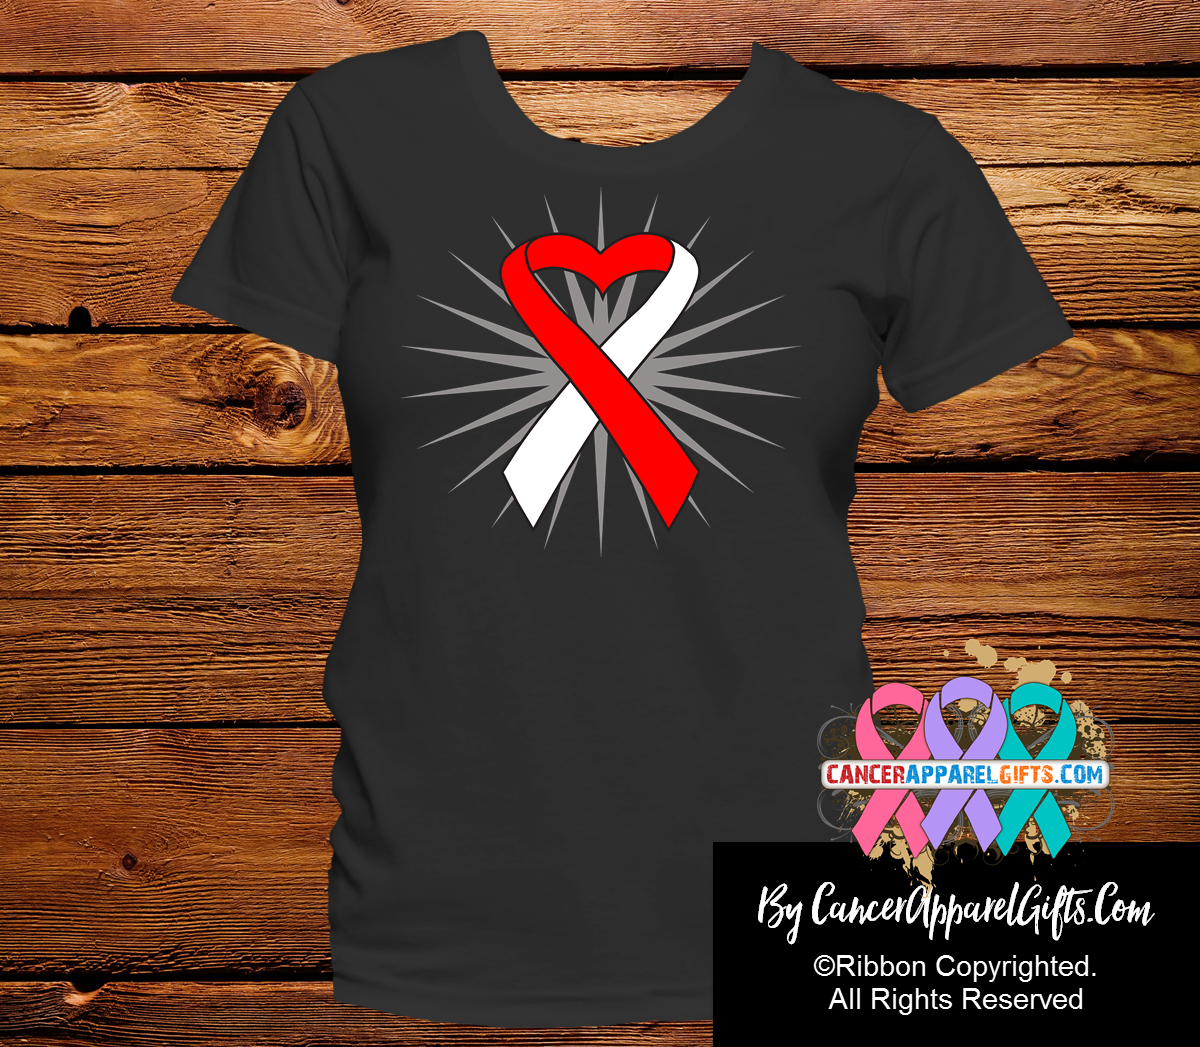 Oral Cancer Awareness Heart Ribbon Shirts - Cancer Apparel and Gifts